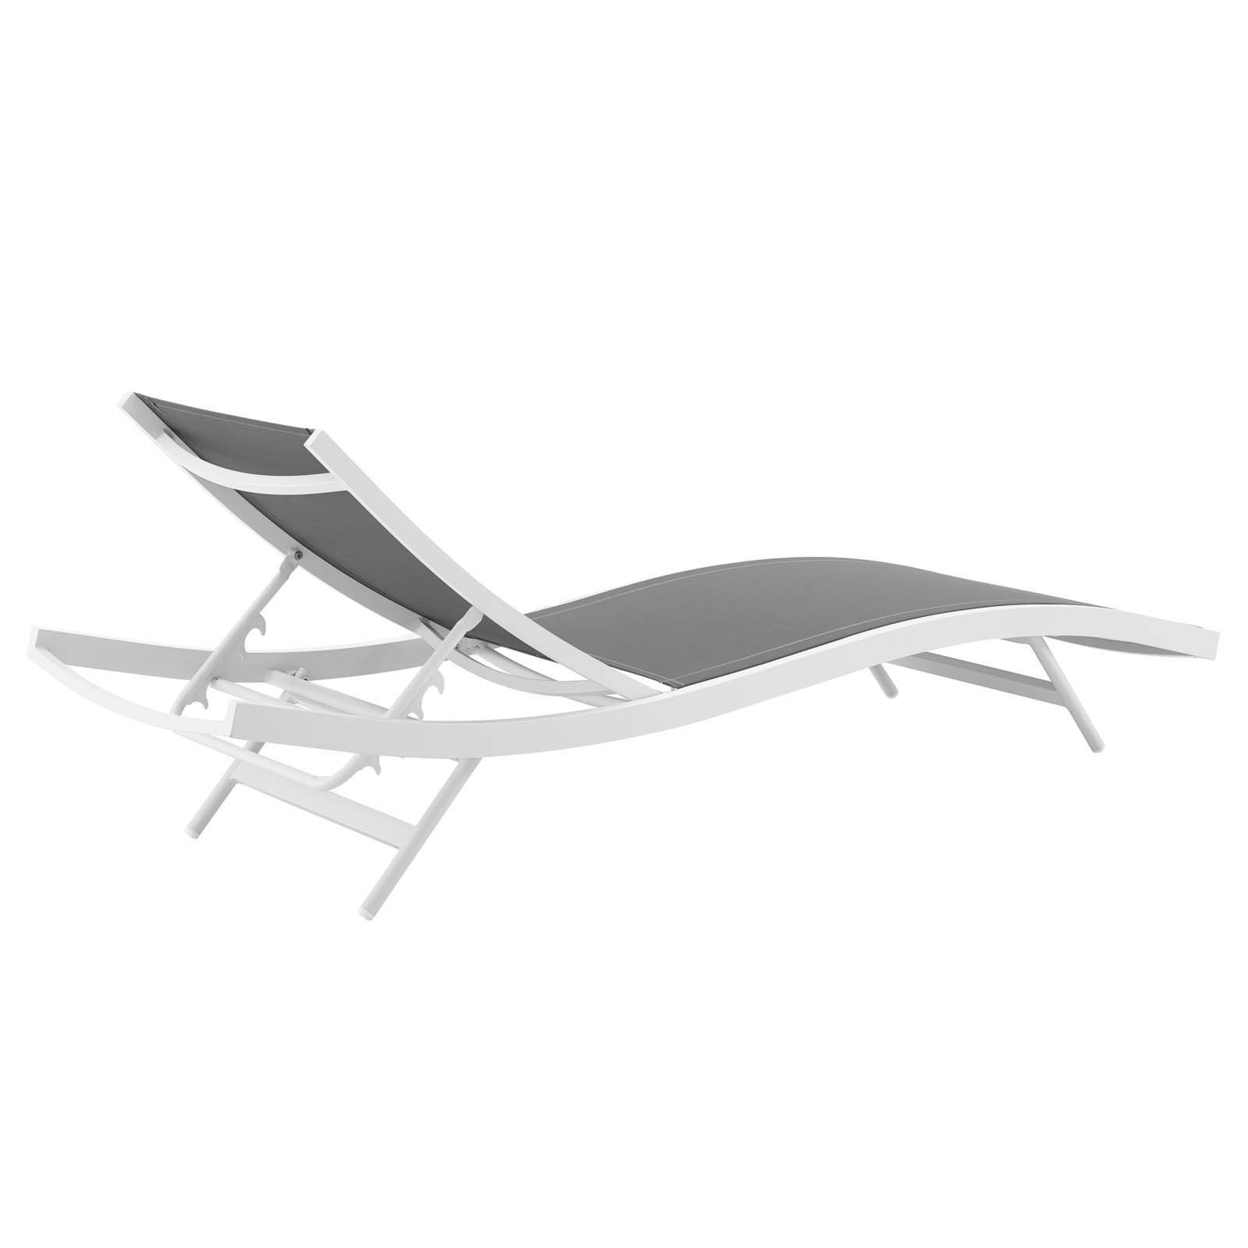 Glimpse Outdoor Patio Mesh Chaise Lounge Set Of 2, White Gray